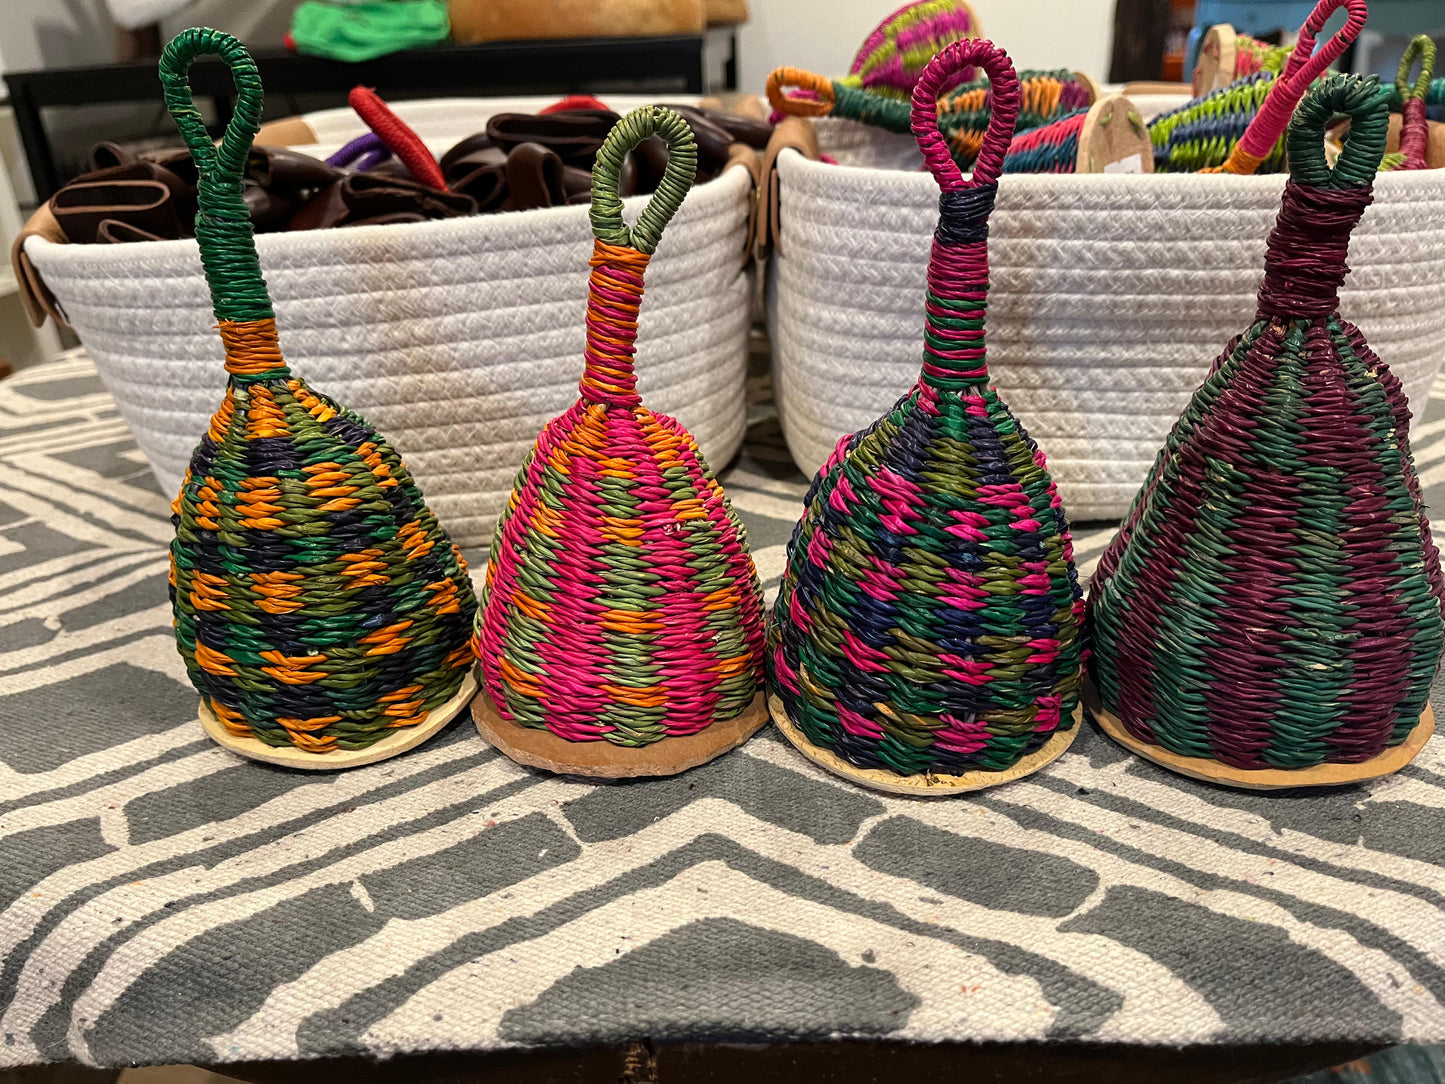 Caxixi (Basket Shakers)